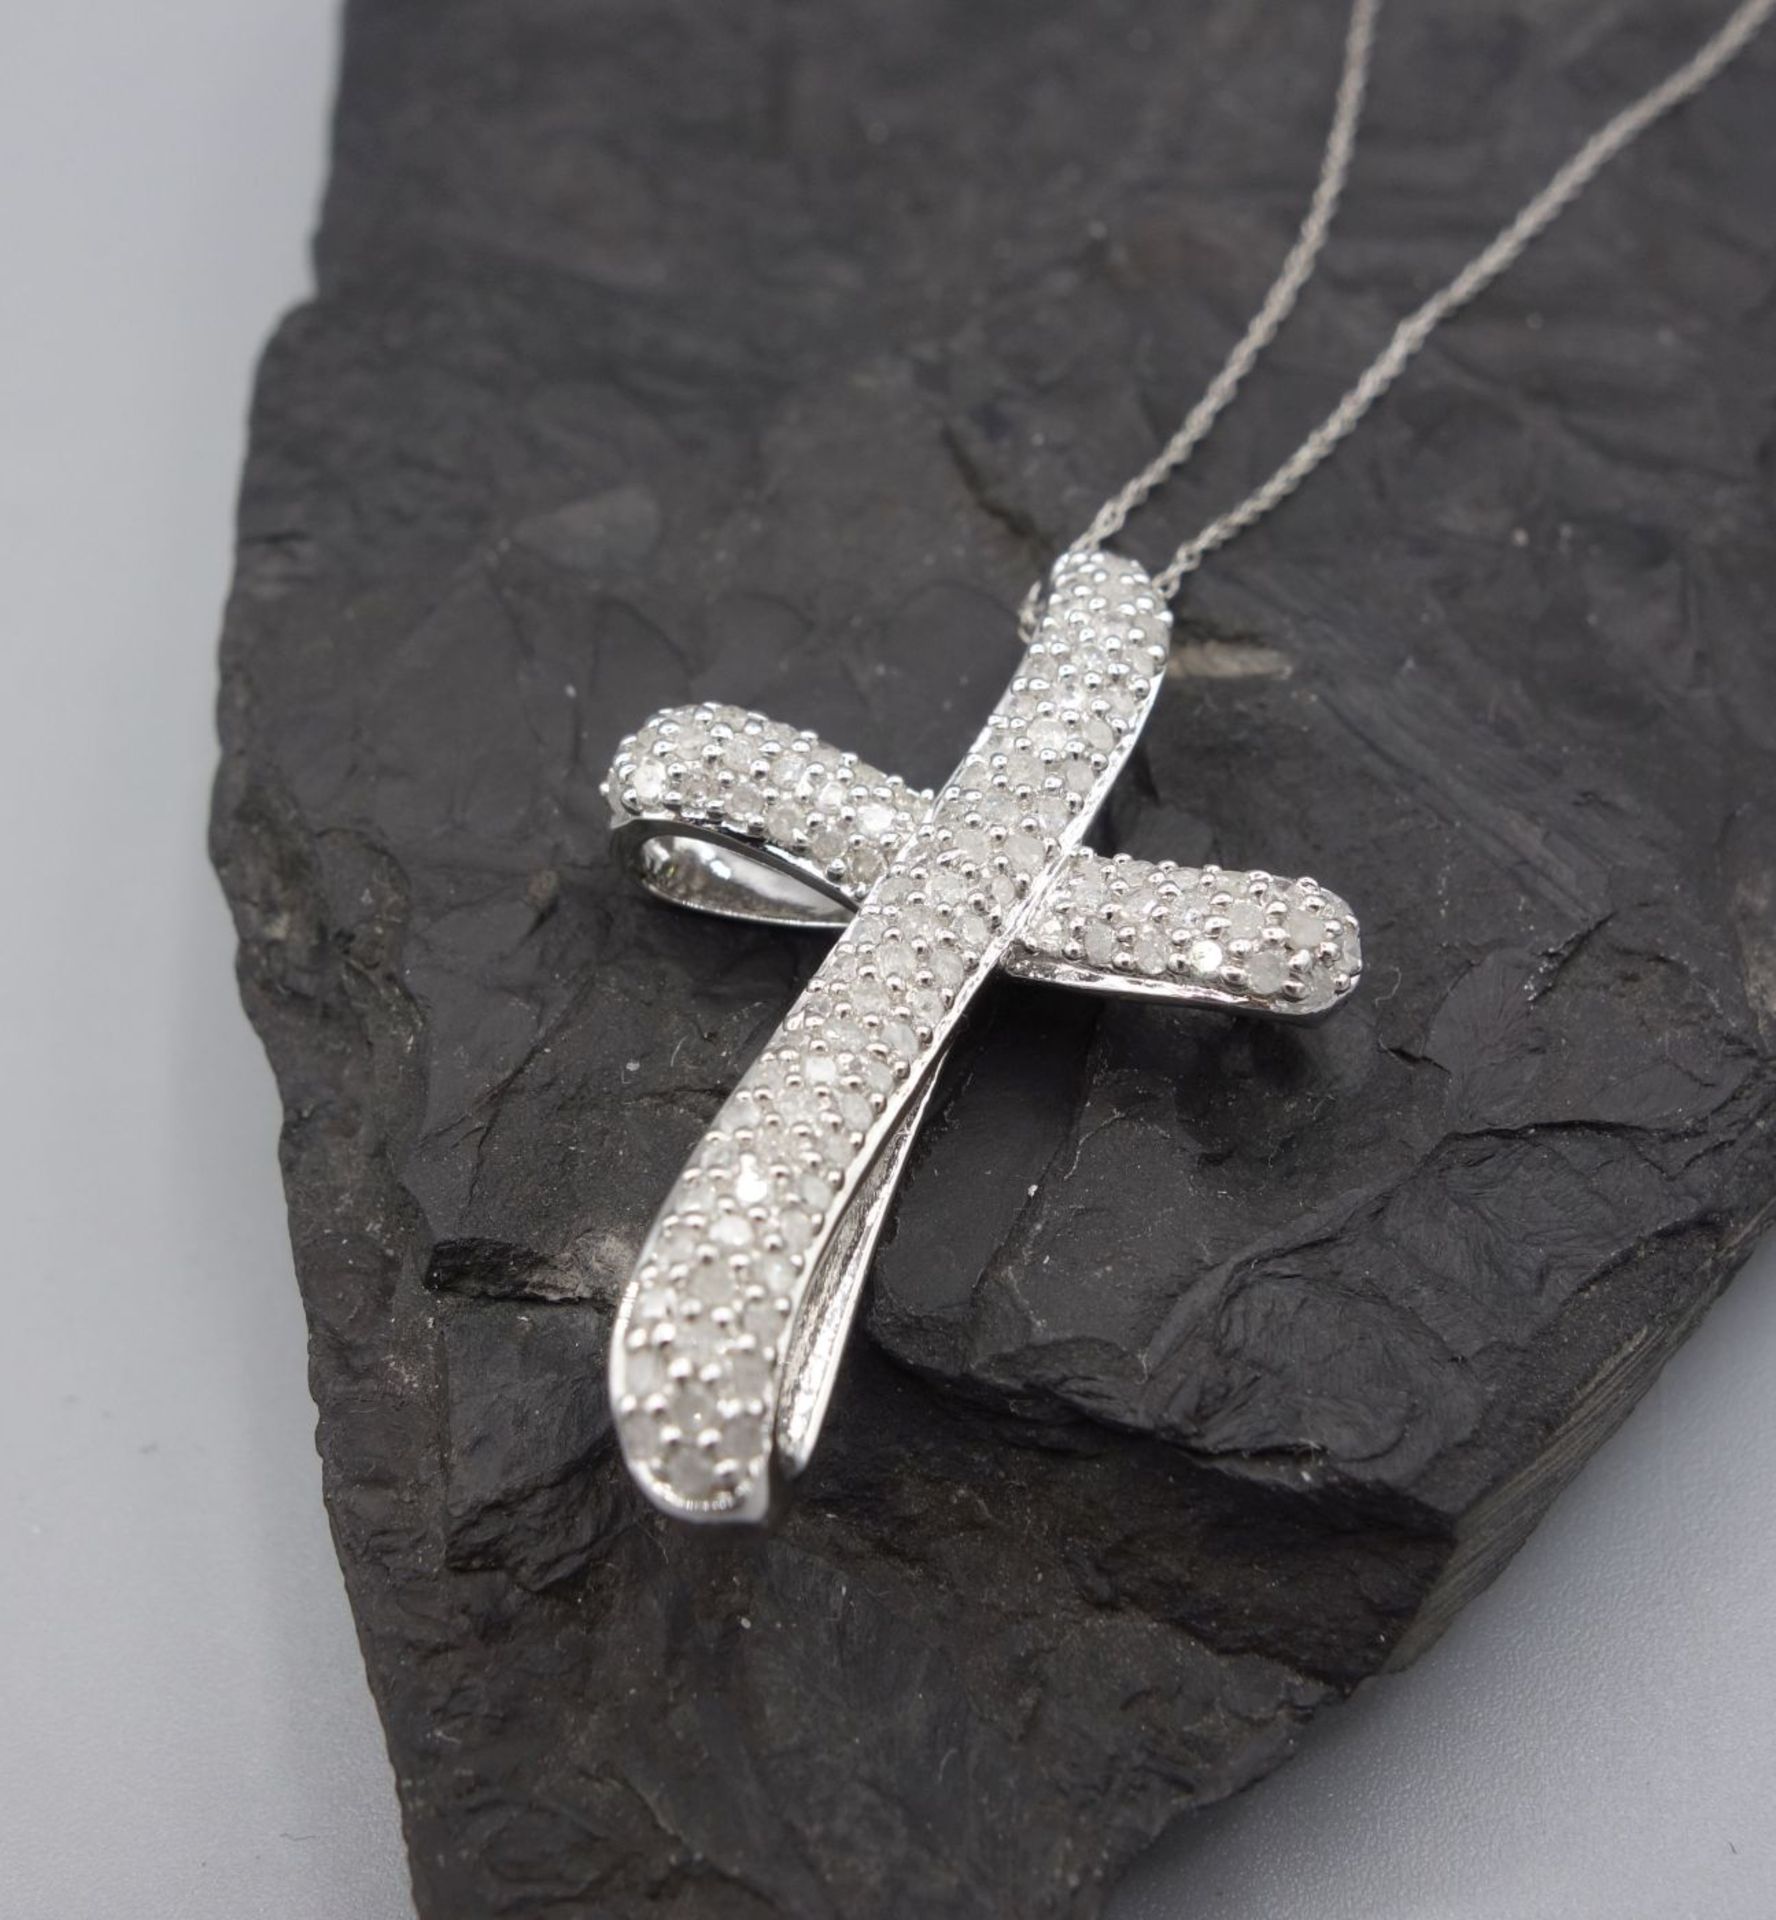 CHAIN WITH CROSS PENDANT - Image 3 of 4